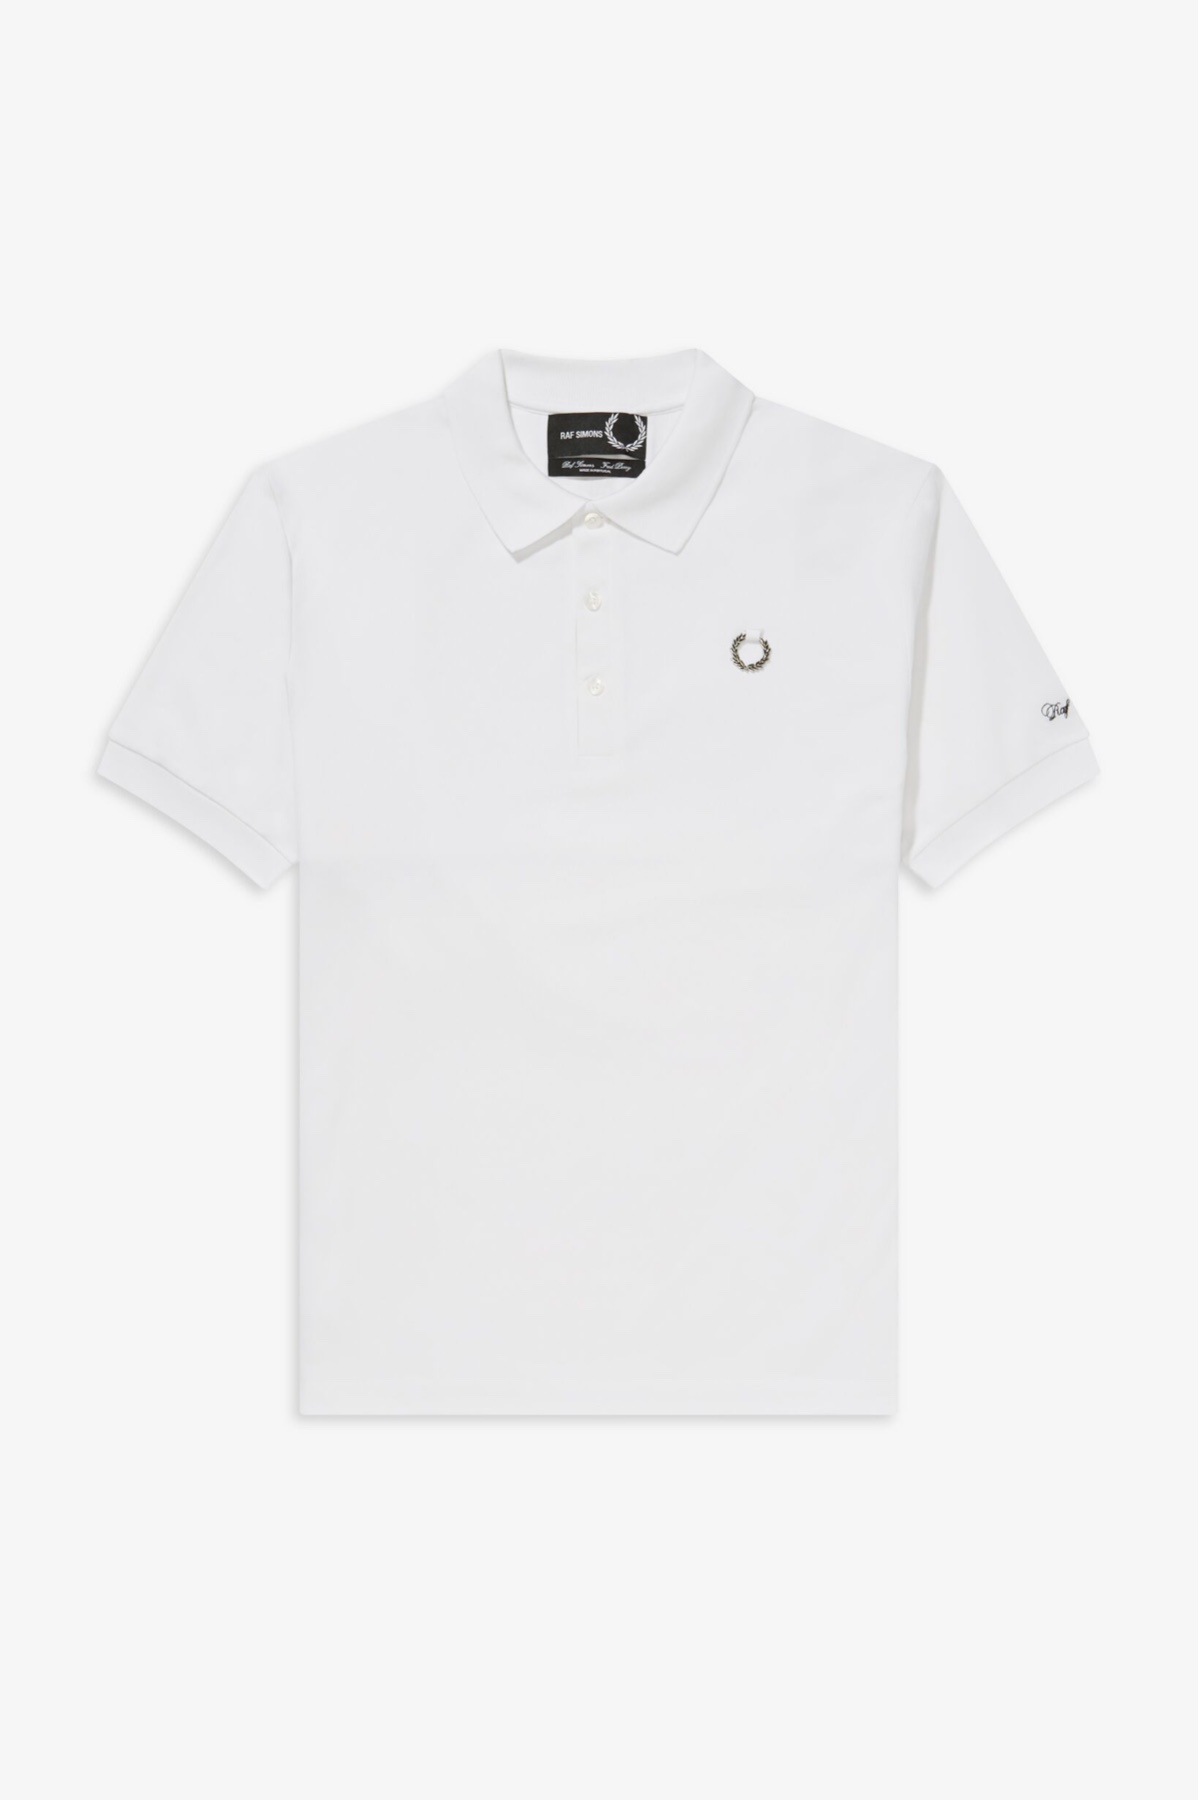 Fred Perry x Raf Simons SS20